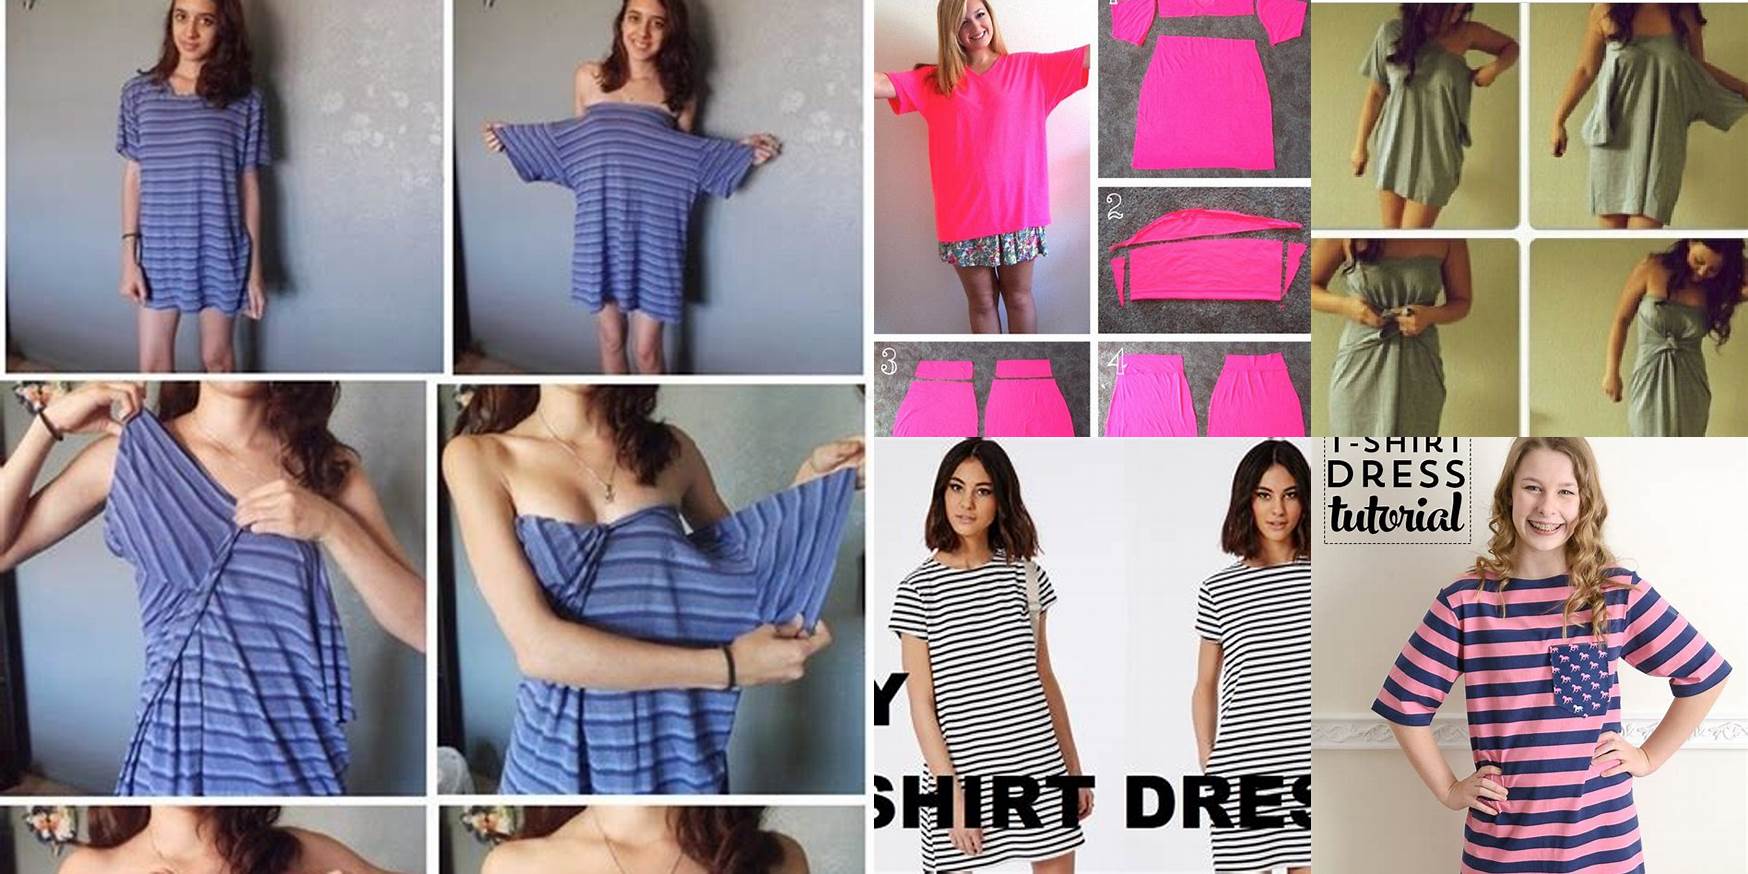 How To Make A Dress Out Of At Shirt